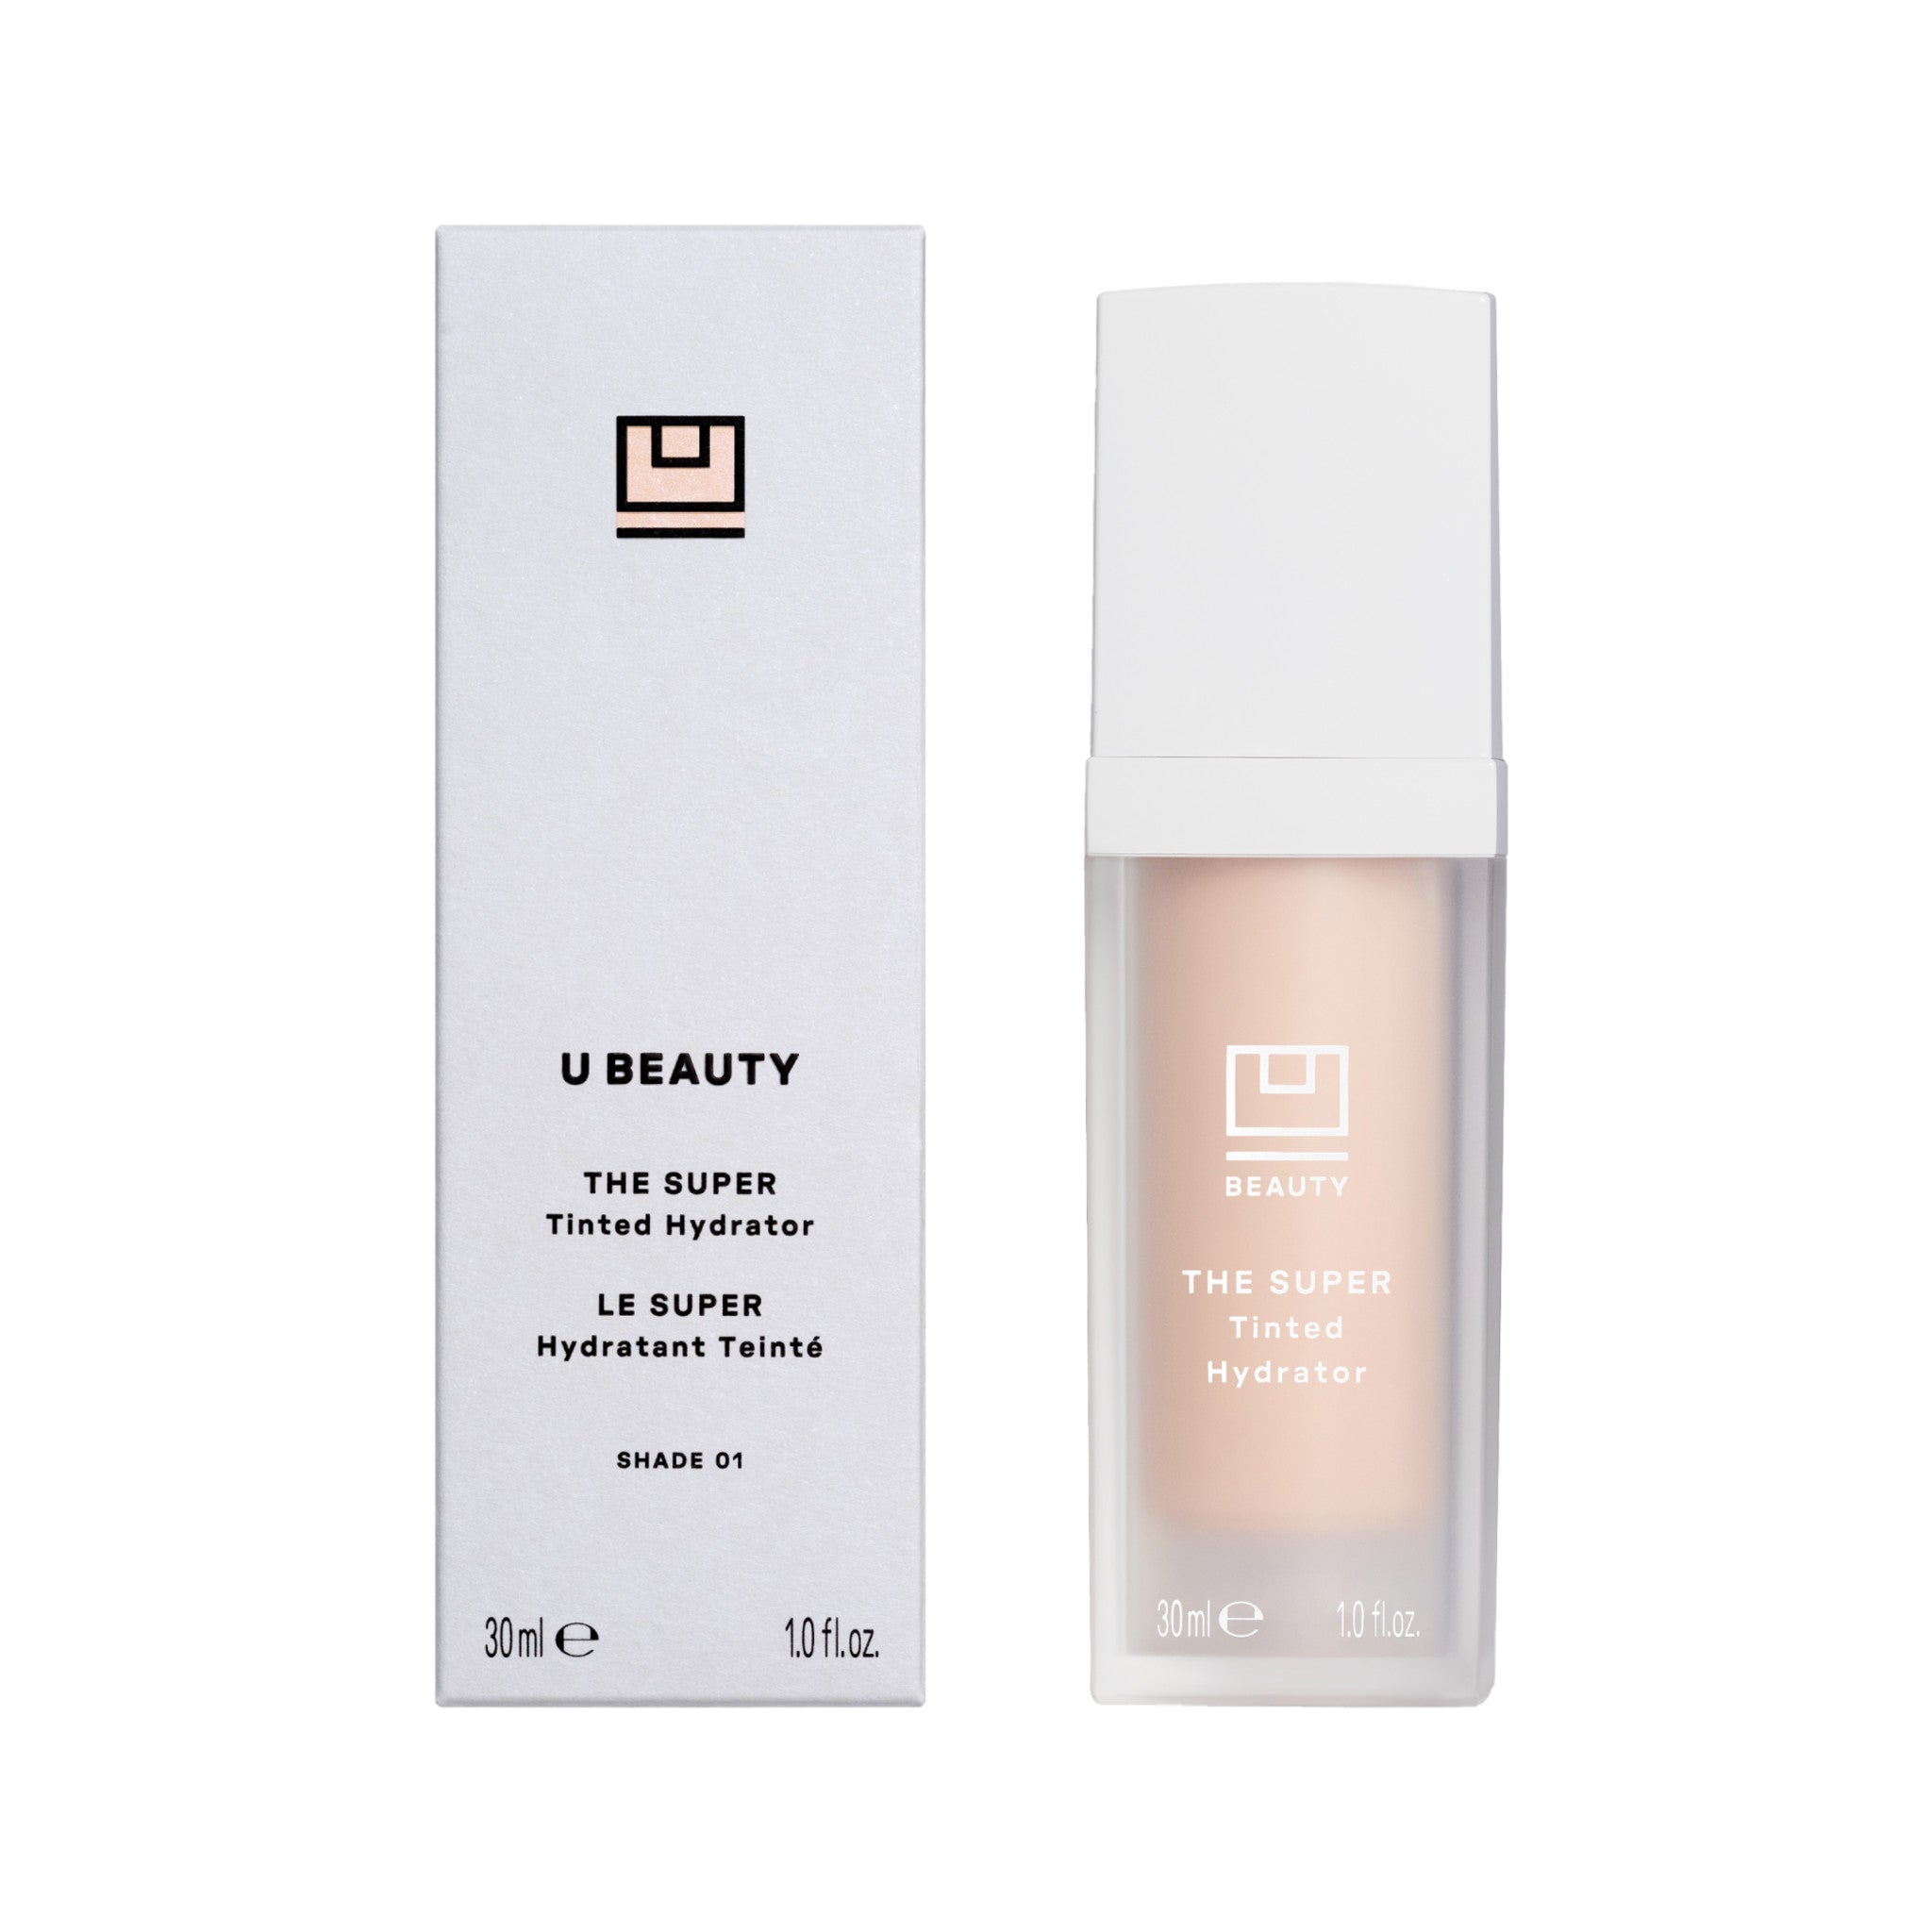 U Beauty Super Tinted Hydrator Color/Shade variant: 01 main image. This product is for light complexions